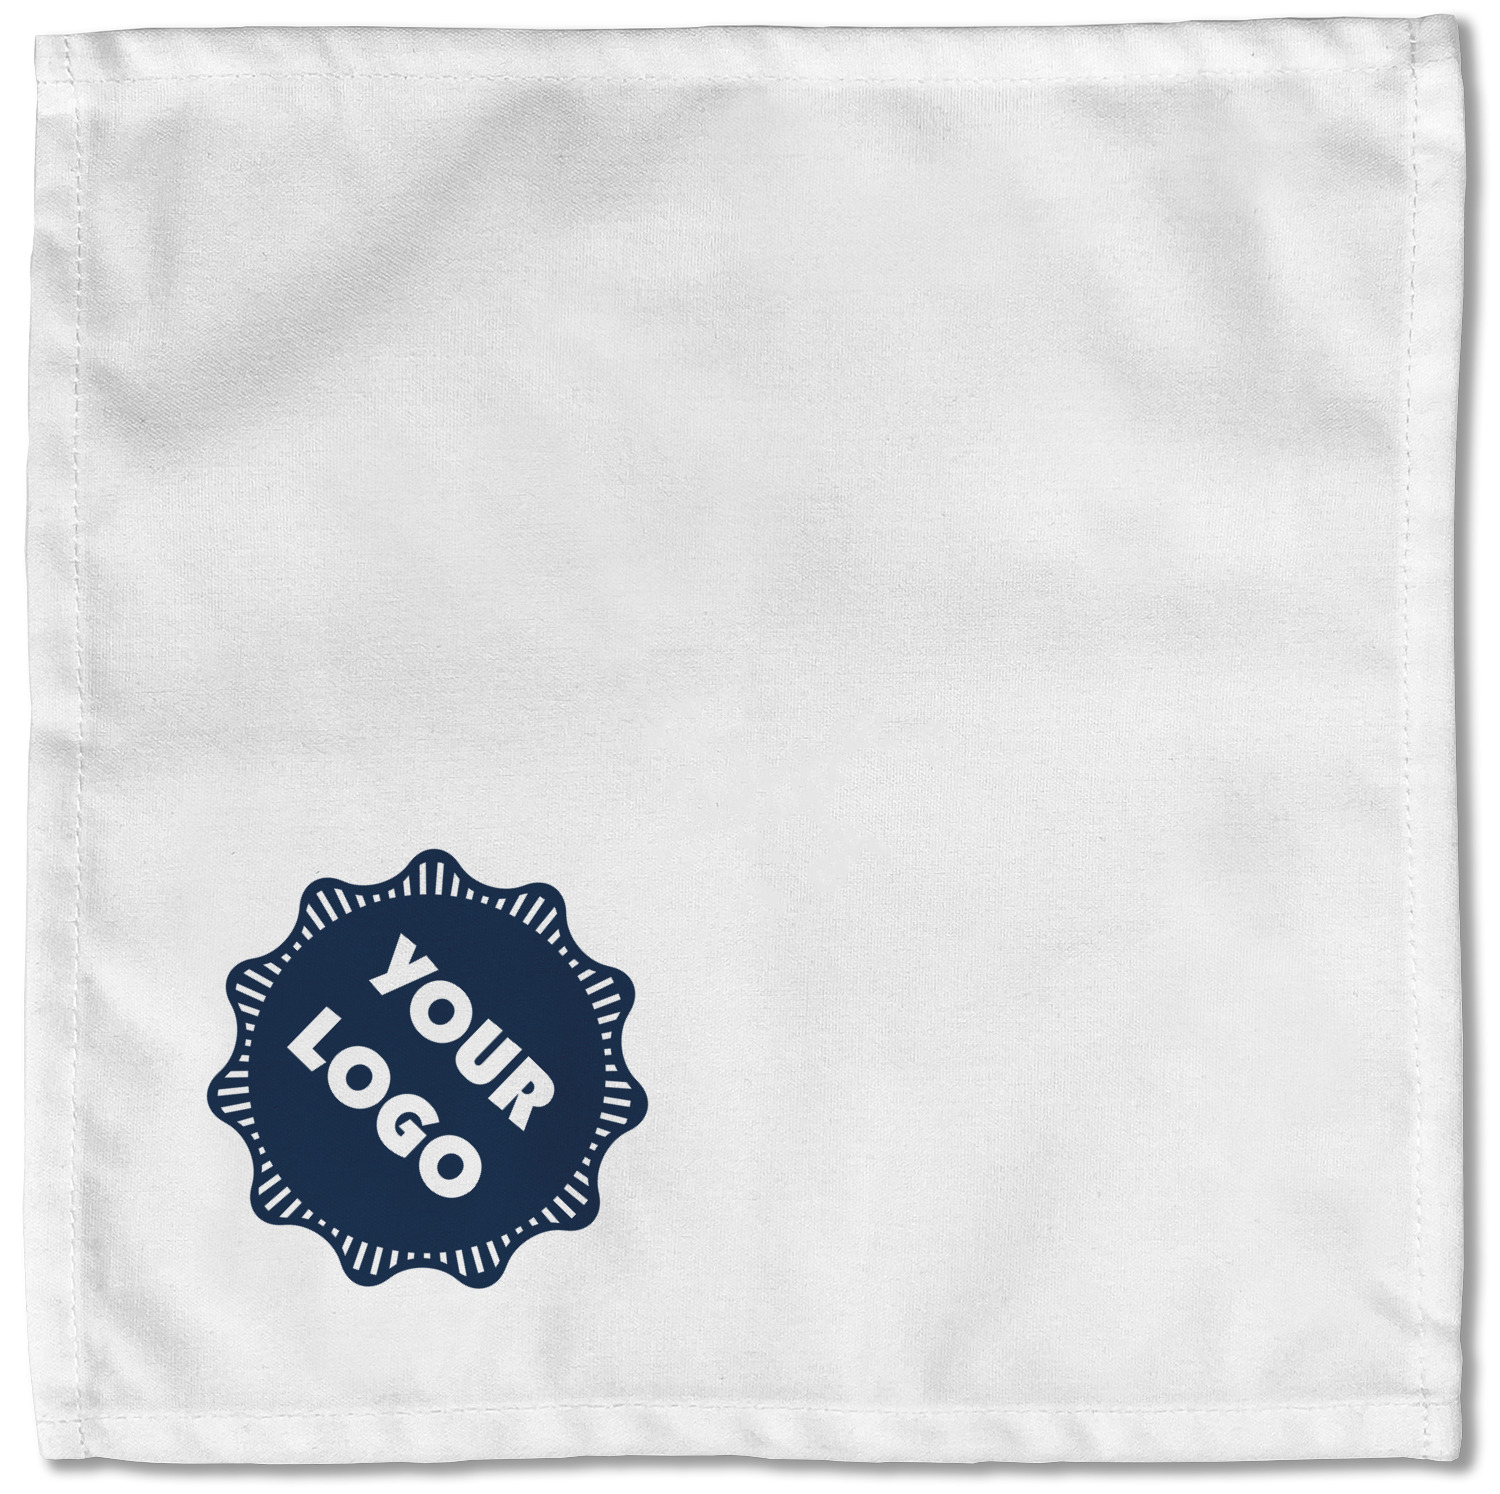 https://www.youcustomizeit.com/common/MAKE/6666411/Logo-Cloth-Napkins-Personalized-Lunch-Single-Full-Open.jpg?lm=1686947118